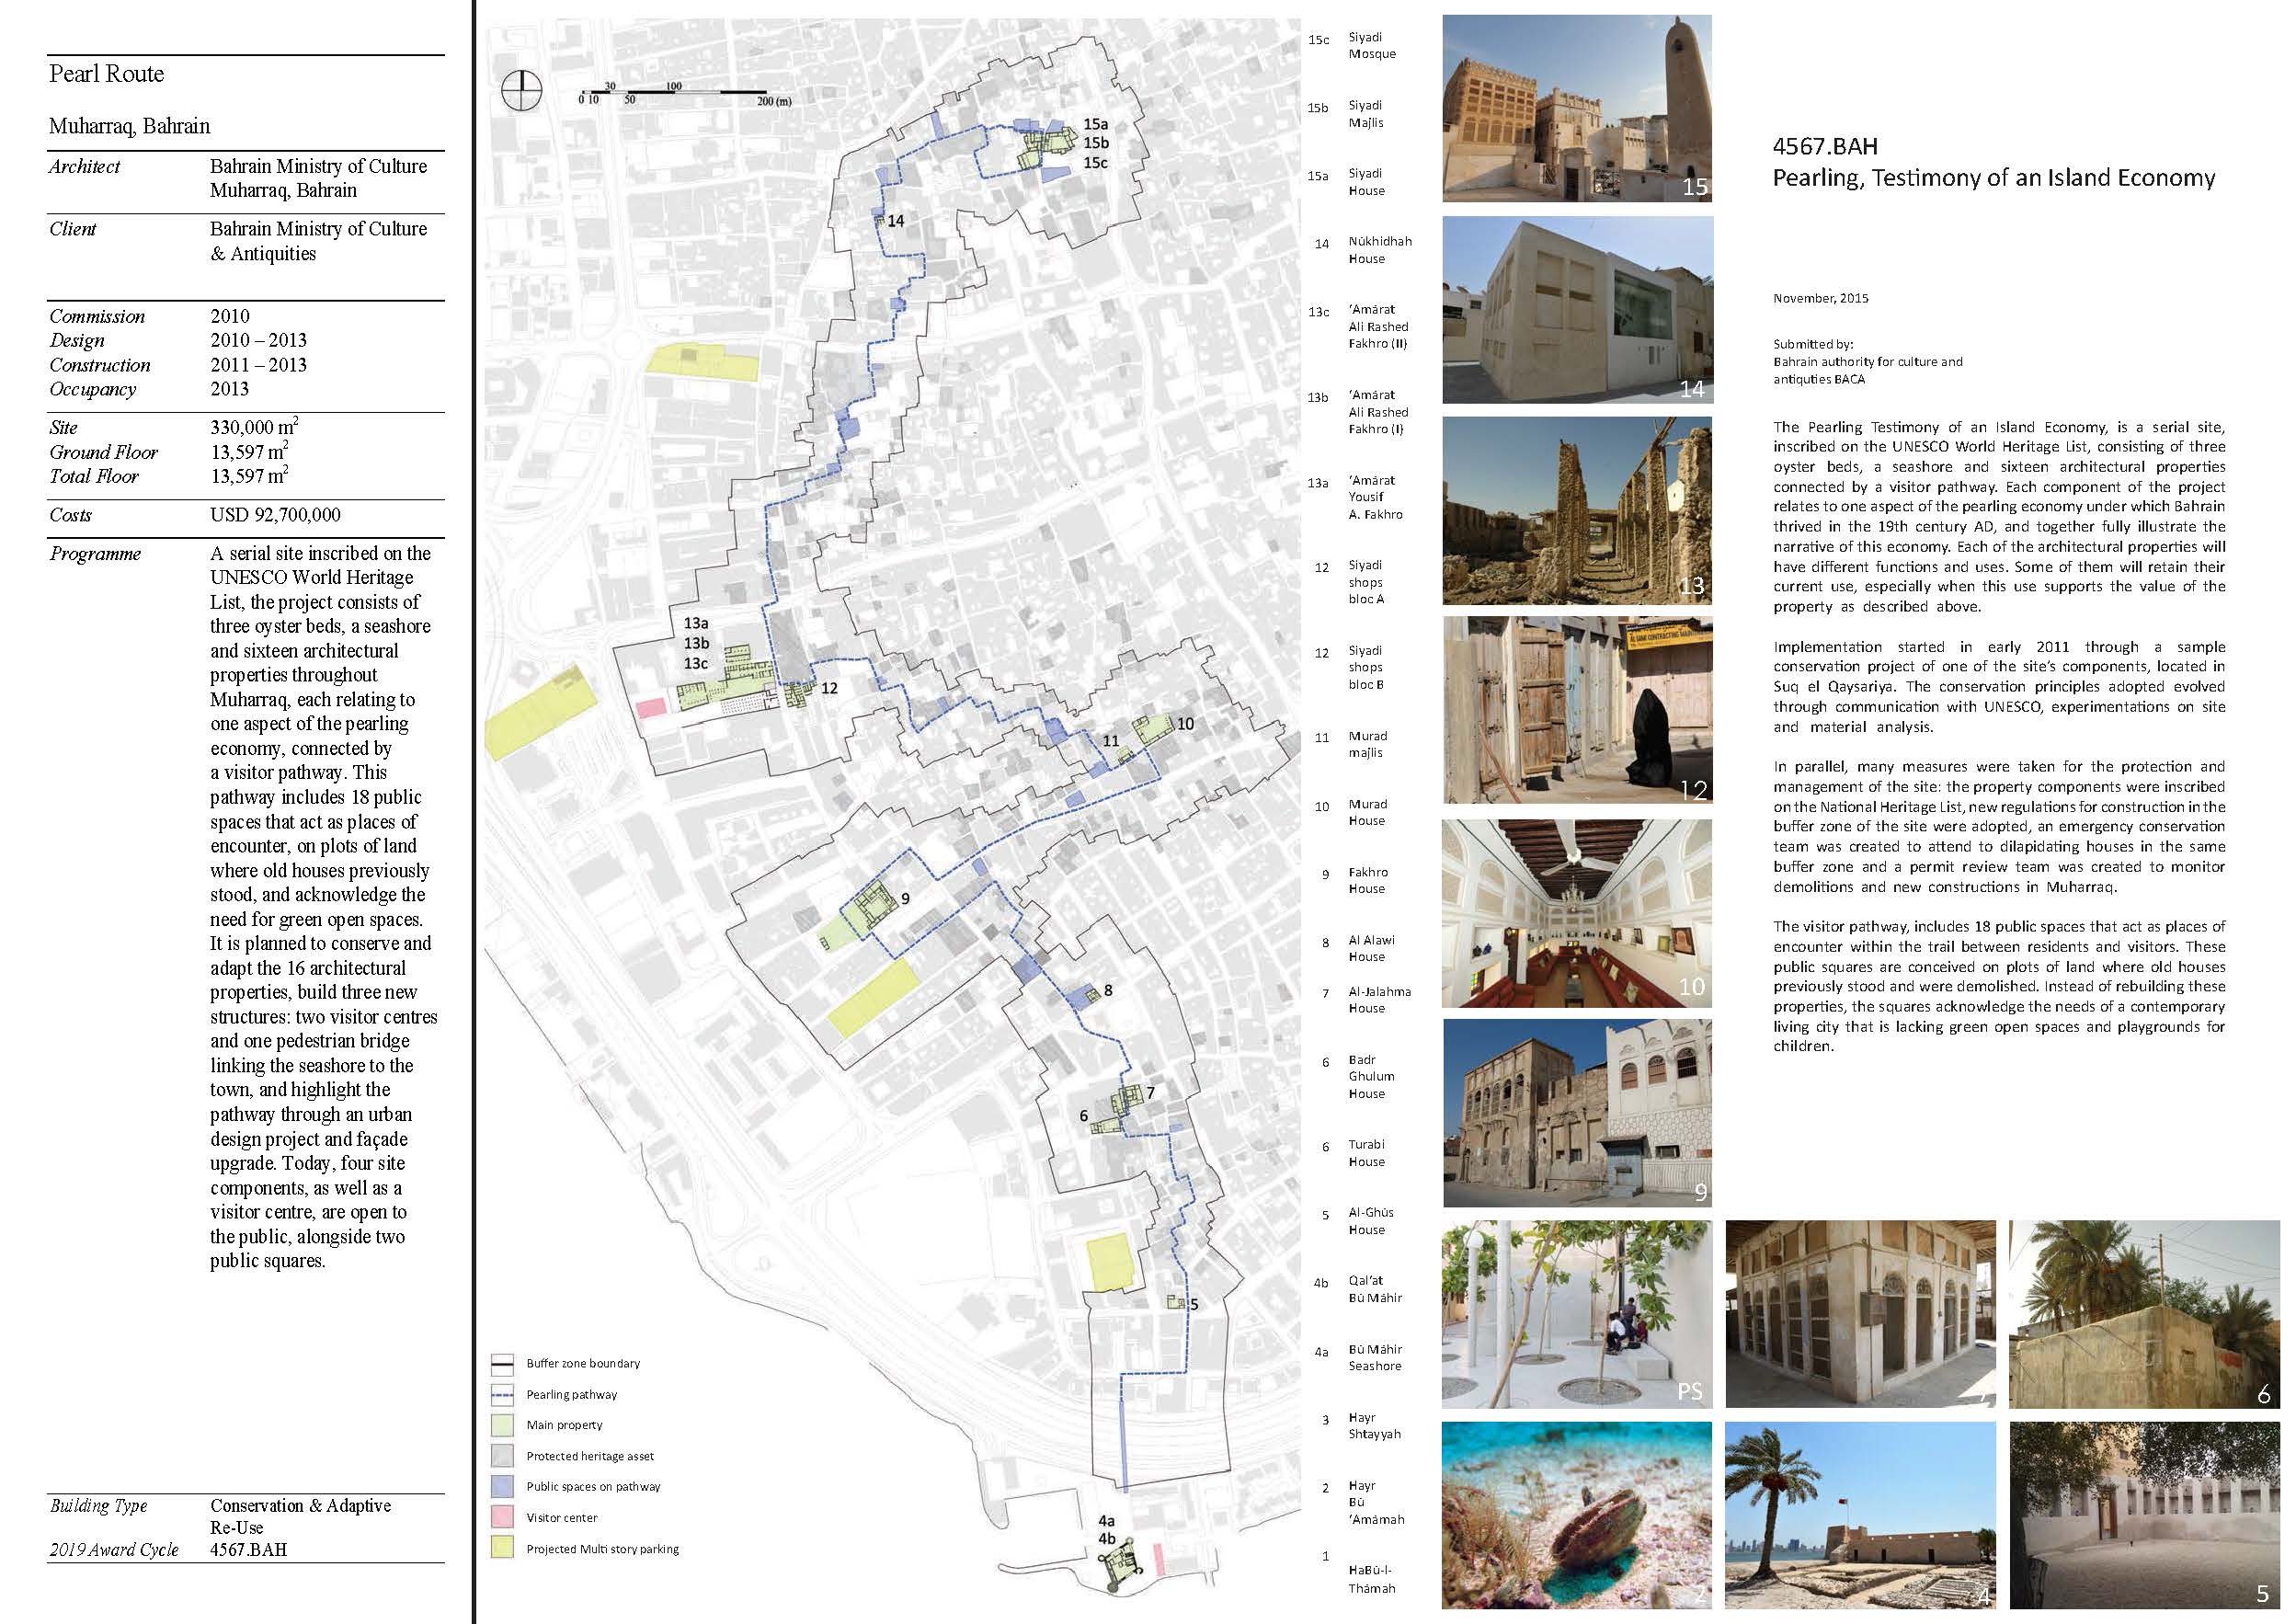 Revitalisation of Muharraq - Presentation panels are drawings, images, and text graphically prepared by the architect and submitted to the Aga Khan Award for Architecture during the later round of the Award cycle. The portfolios are kept in the Aga Khan Trust for Culture Library for consultation purposes.